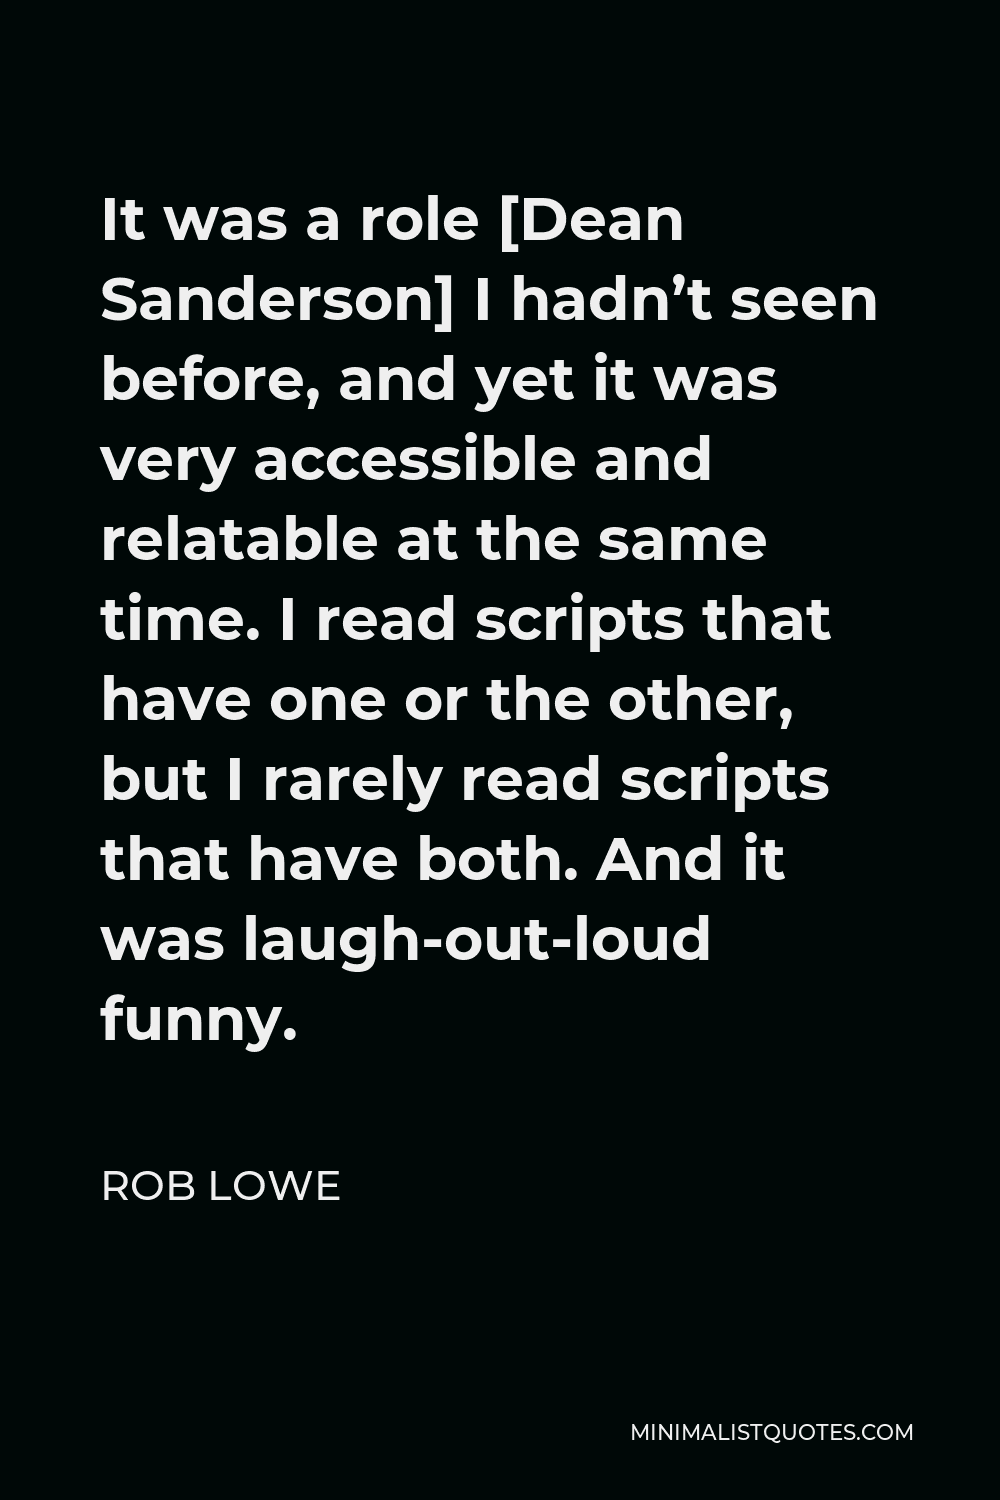 Rob Lowe Quote - It was a role [Dean Sanderson] I hadn’t seen before, and yet it was very accessible and relatable at the same time. I read scripts that have one or the other, but I rarely read scripts that have both. And it was laugh-out-loud funny.